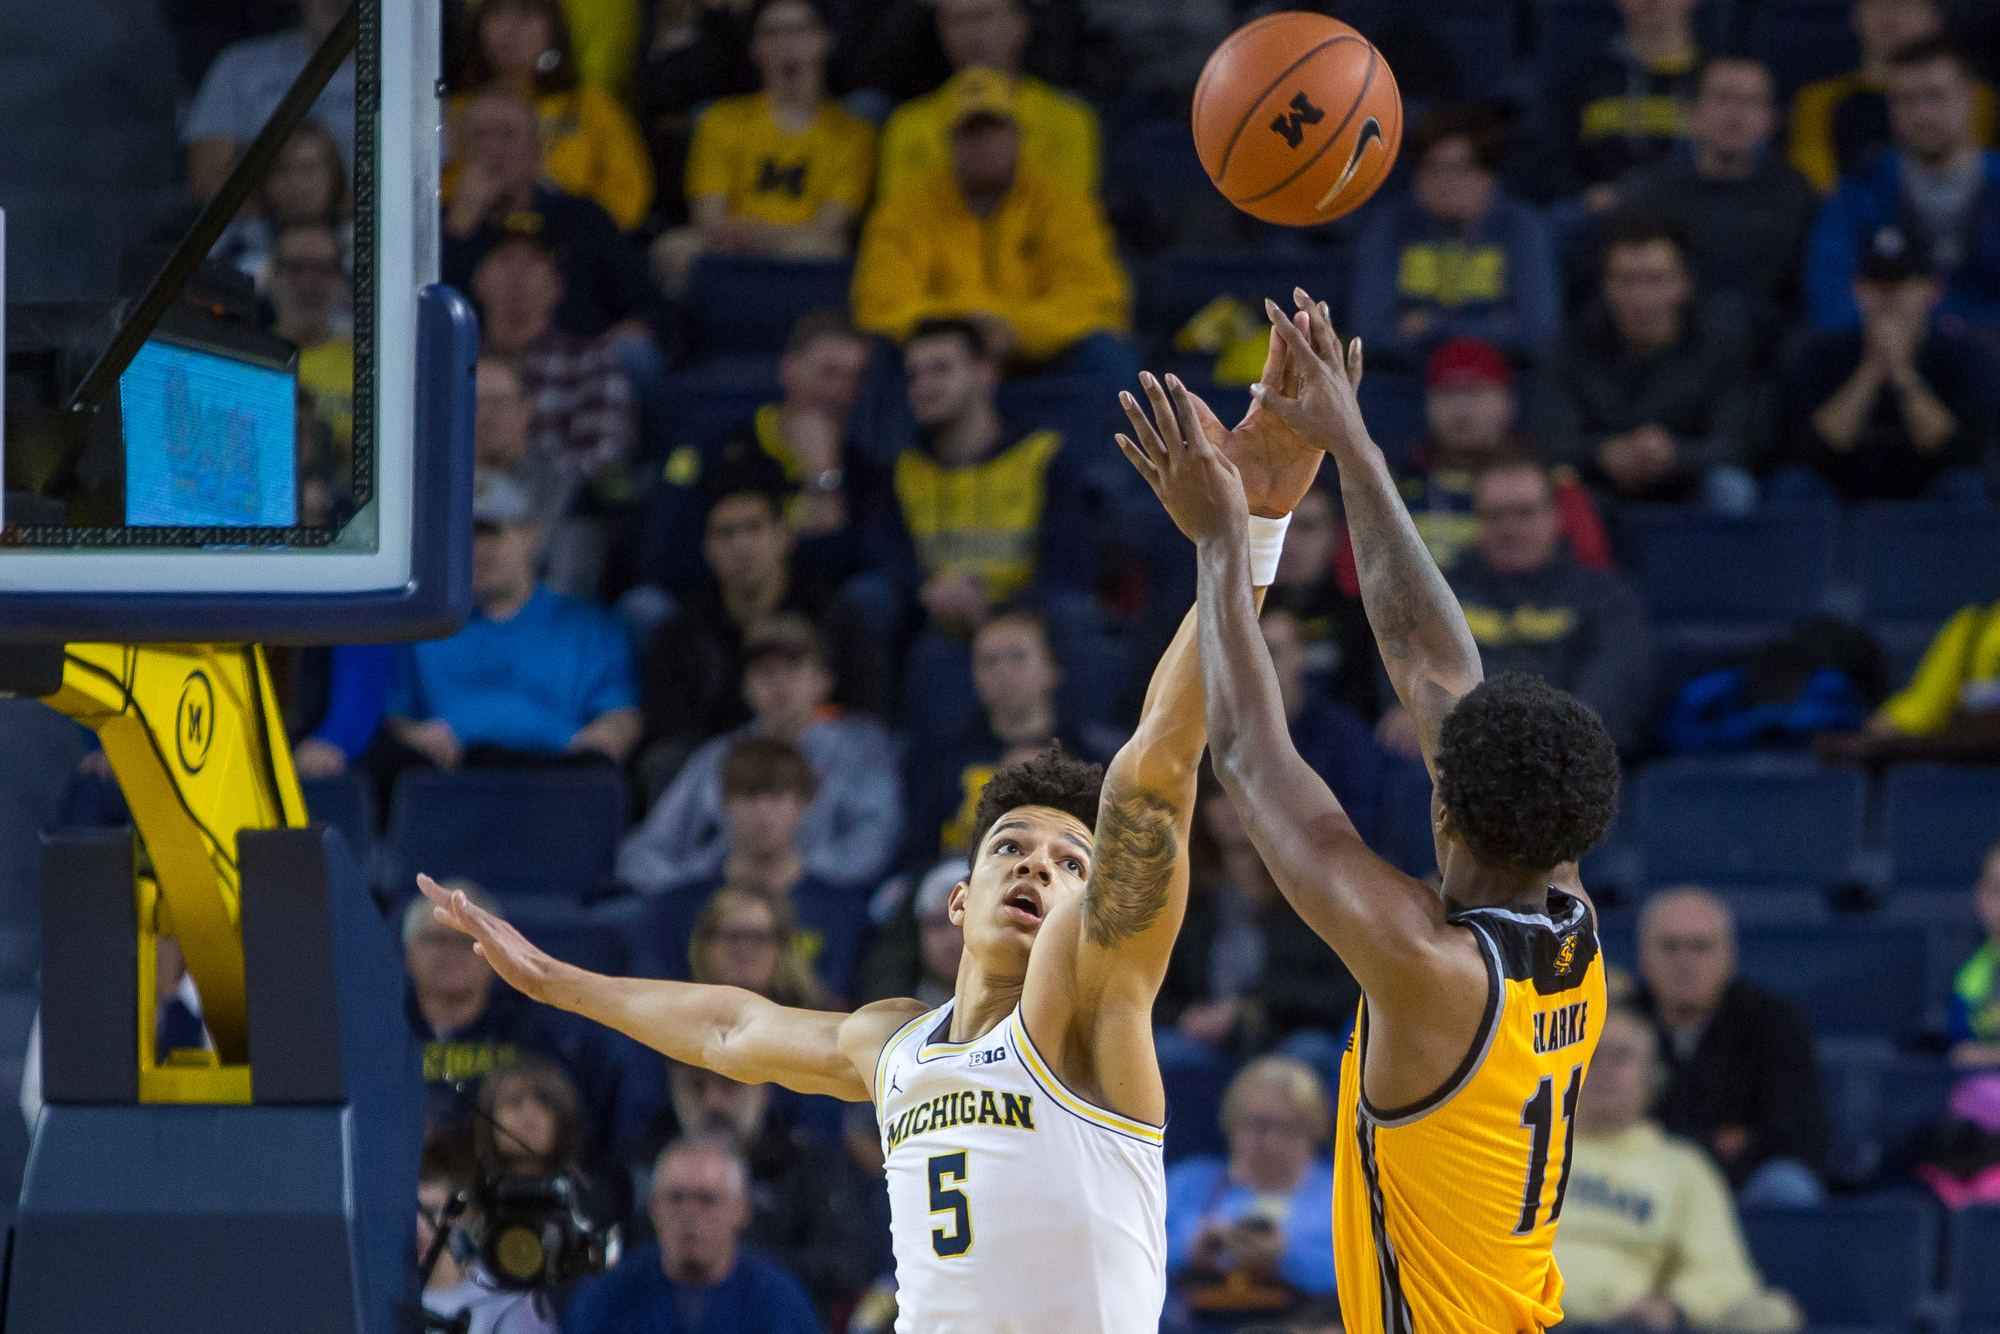  Michigan�s D.J. Wilson (5) attempts to block Kennesaw State's Kyle Clarke (11) during the first half of play against Kennesaw State at the Crisler Center on Saturday, December 3, 2016. Michigan leads Kennesaw State 47-29 at half time. Matt Weigand |